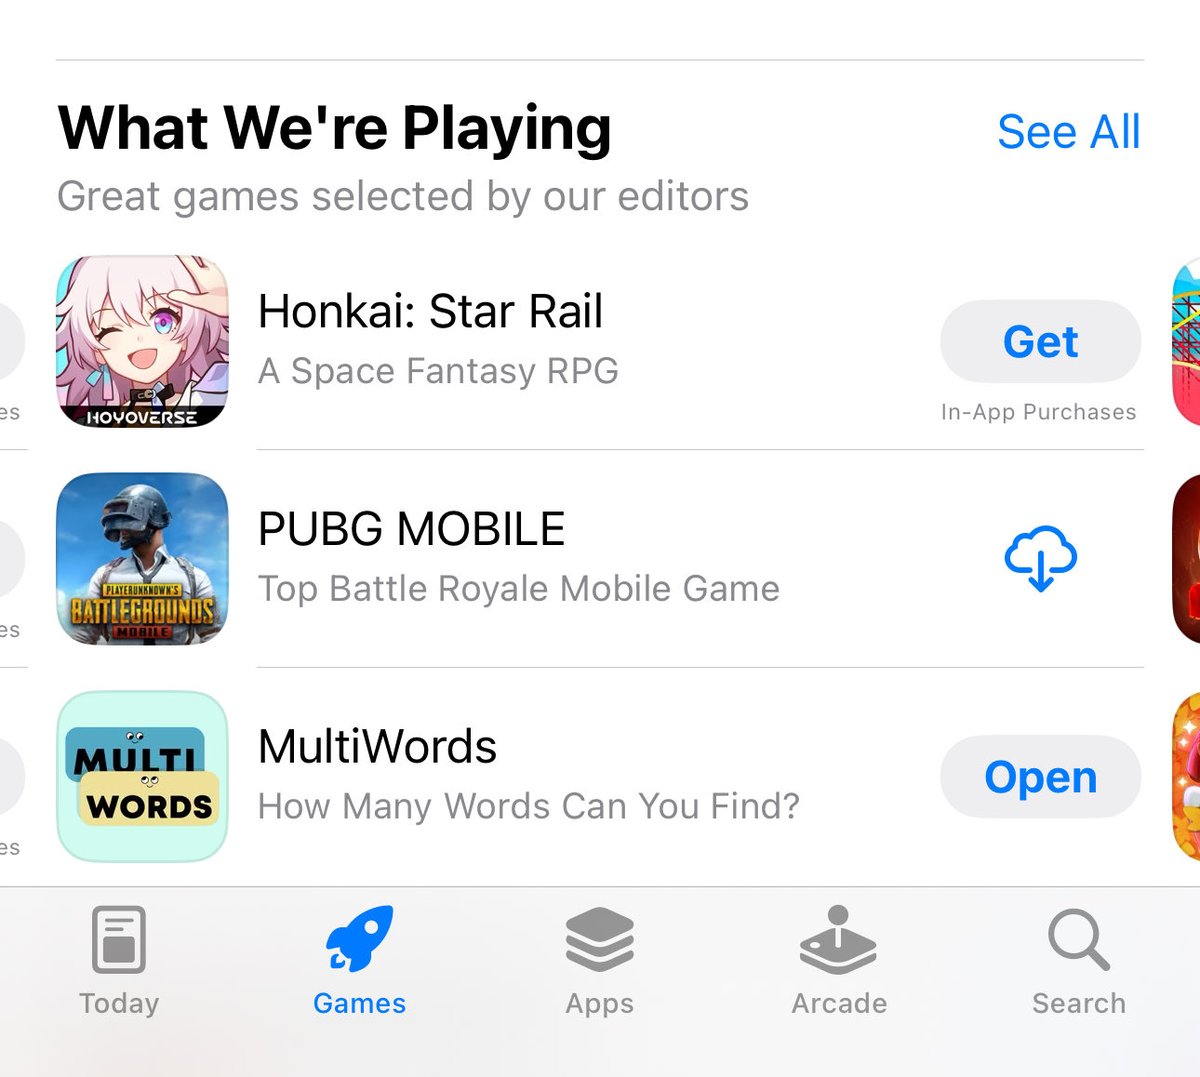 Exciting news! 🌟 MultiWords has been featured on the App Store! 📱✨ 

Challenge your word skills with 8 letters and discover a world of words. 🏆 How many can you find? 🔍✨

apps.apple.com/gb/app/multiwo…

#MultiWords #WordGame #AppStoreFeature #buildinpublic